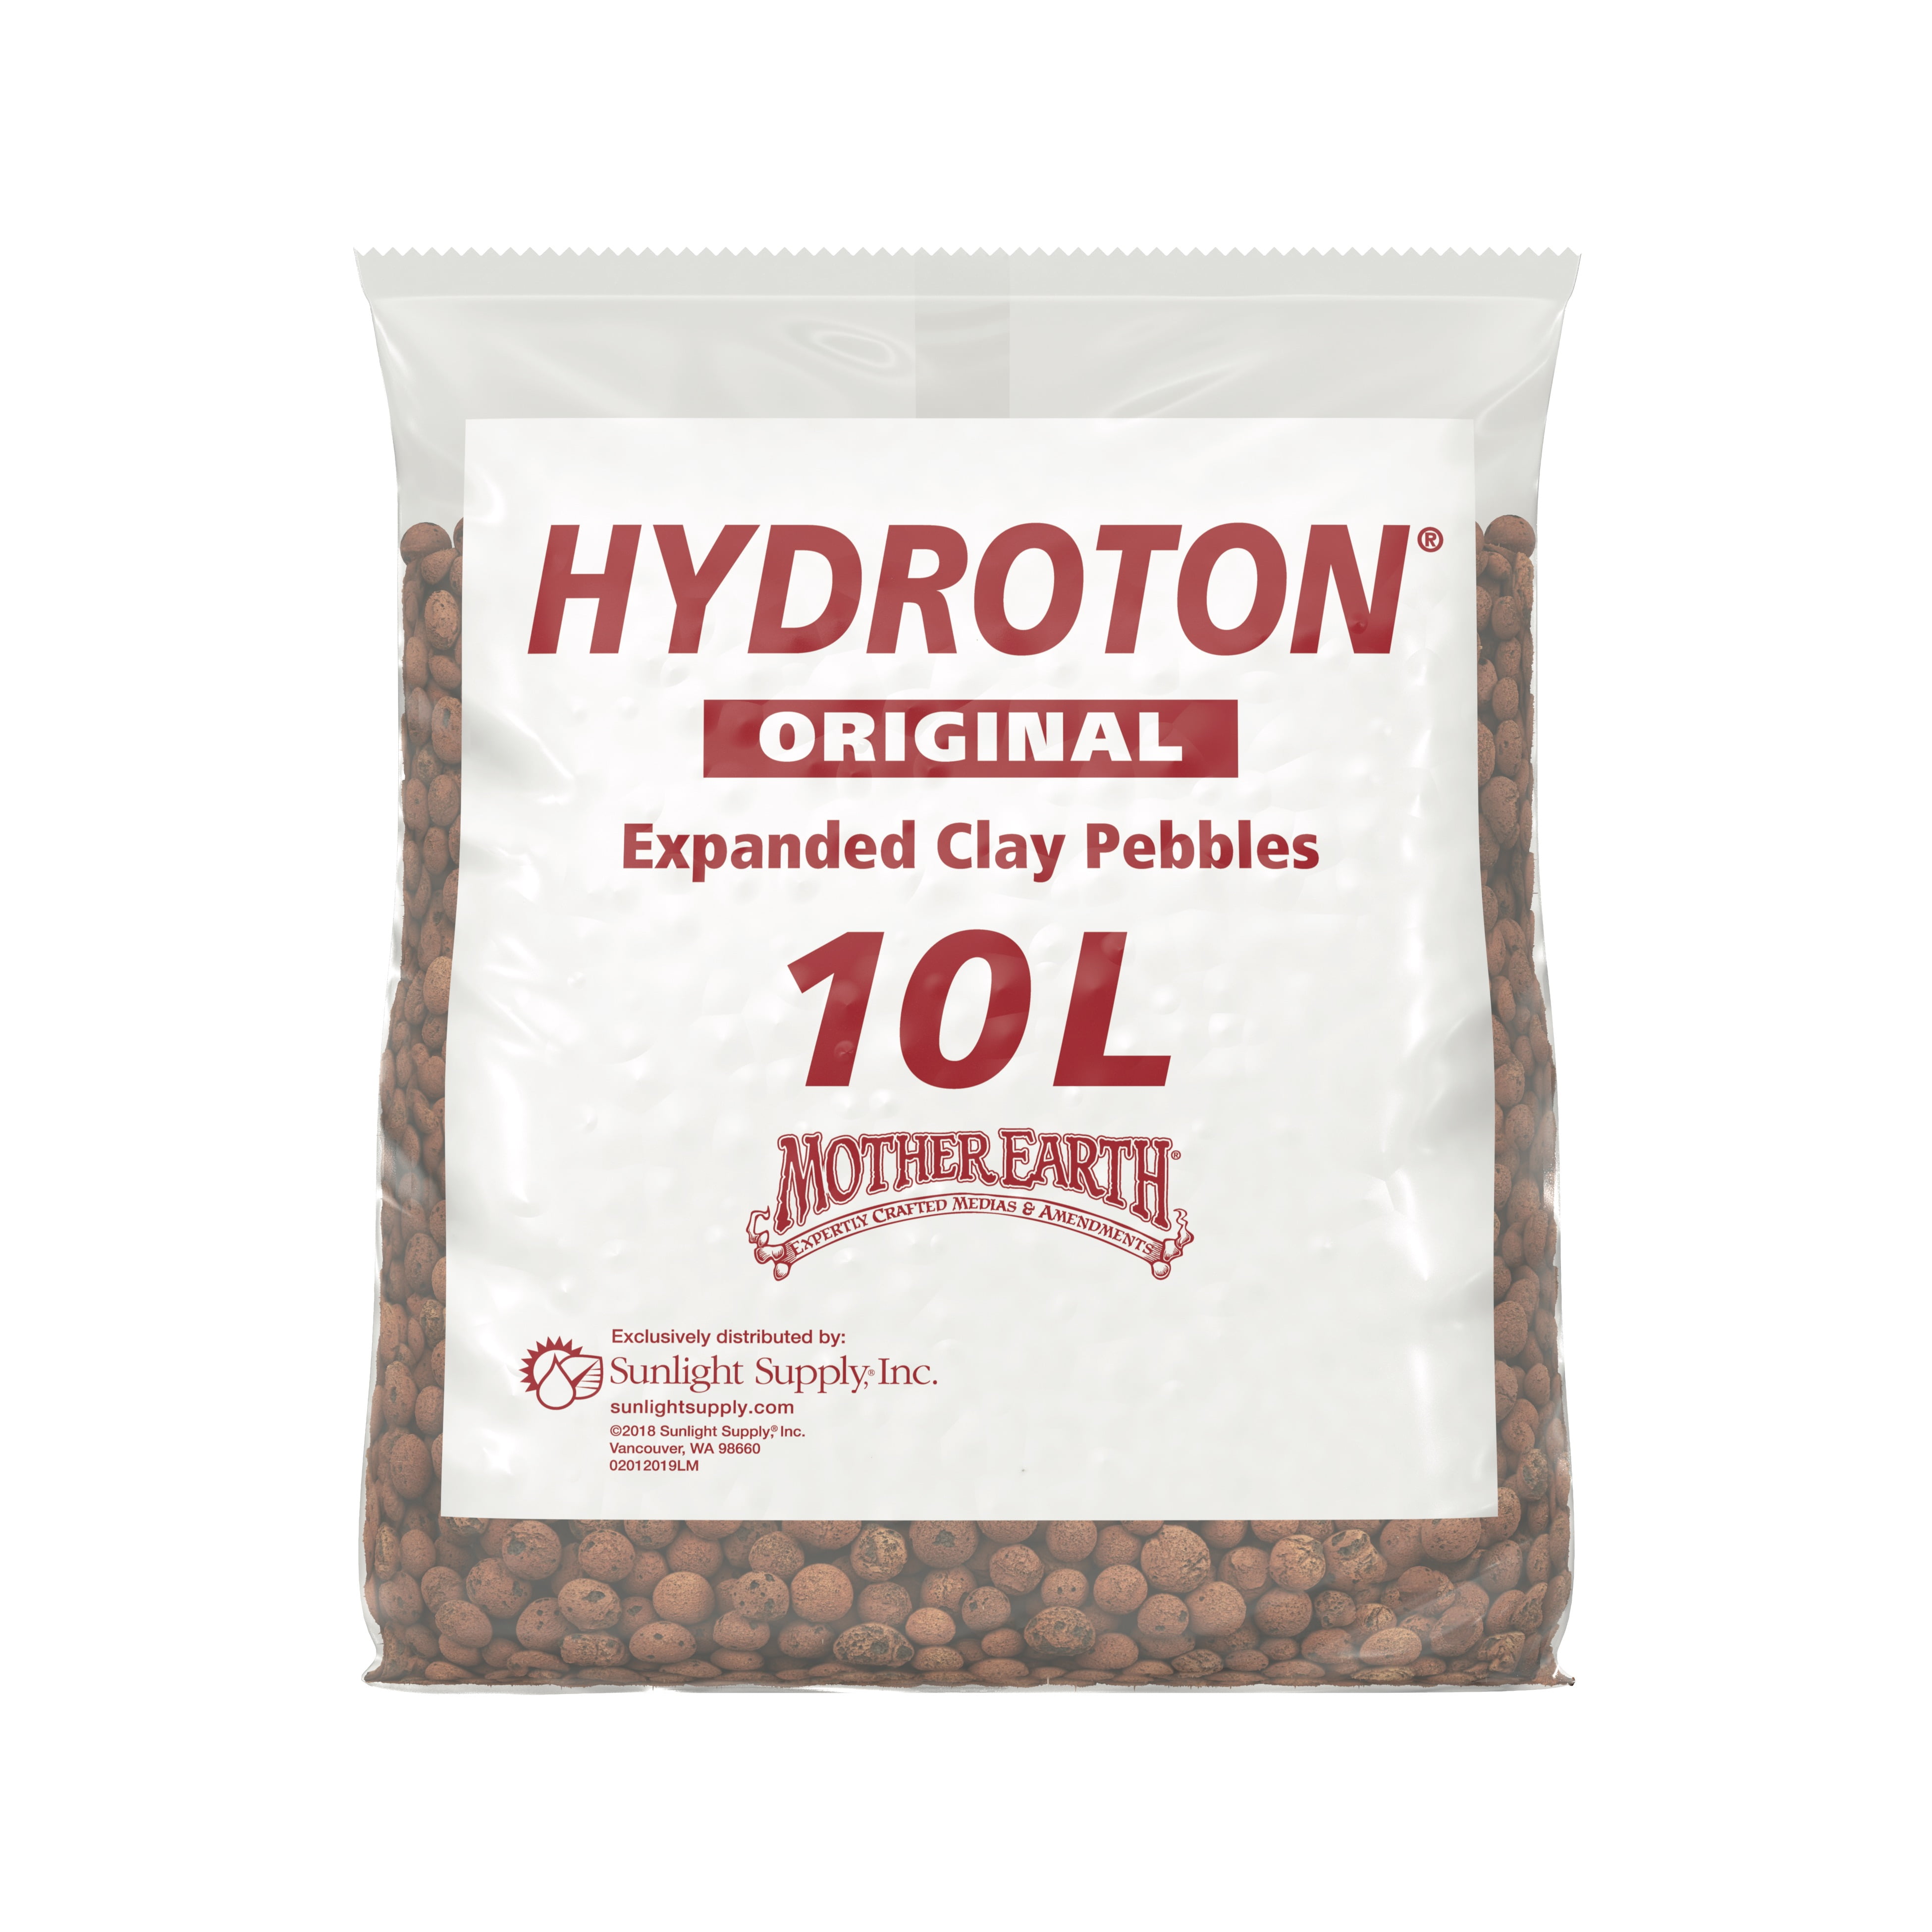 HYDROTON Expanded Clay Pebbles Hydroponics Orchids Grow Media Choose by LITER 